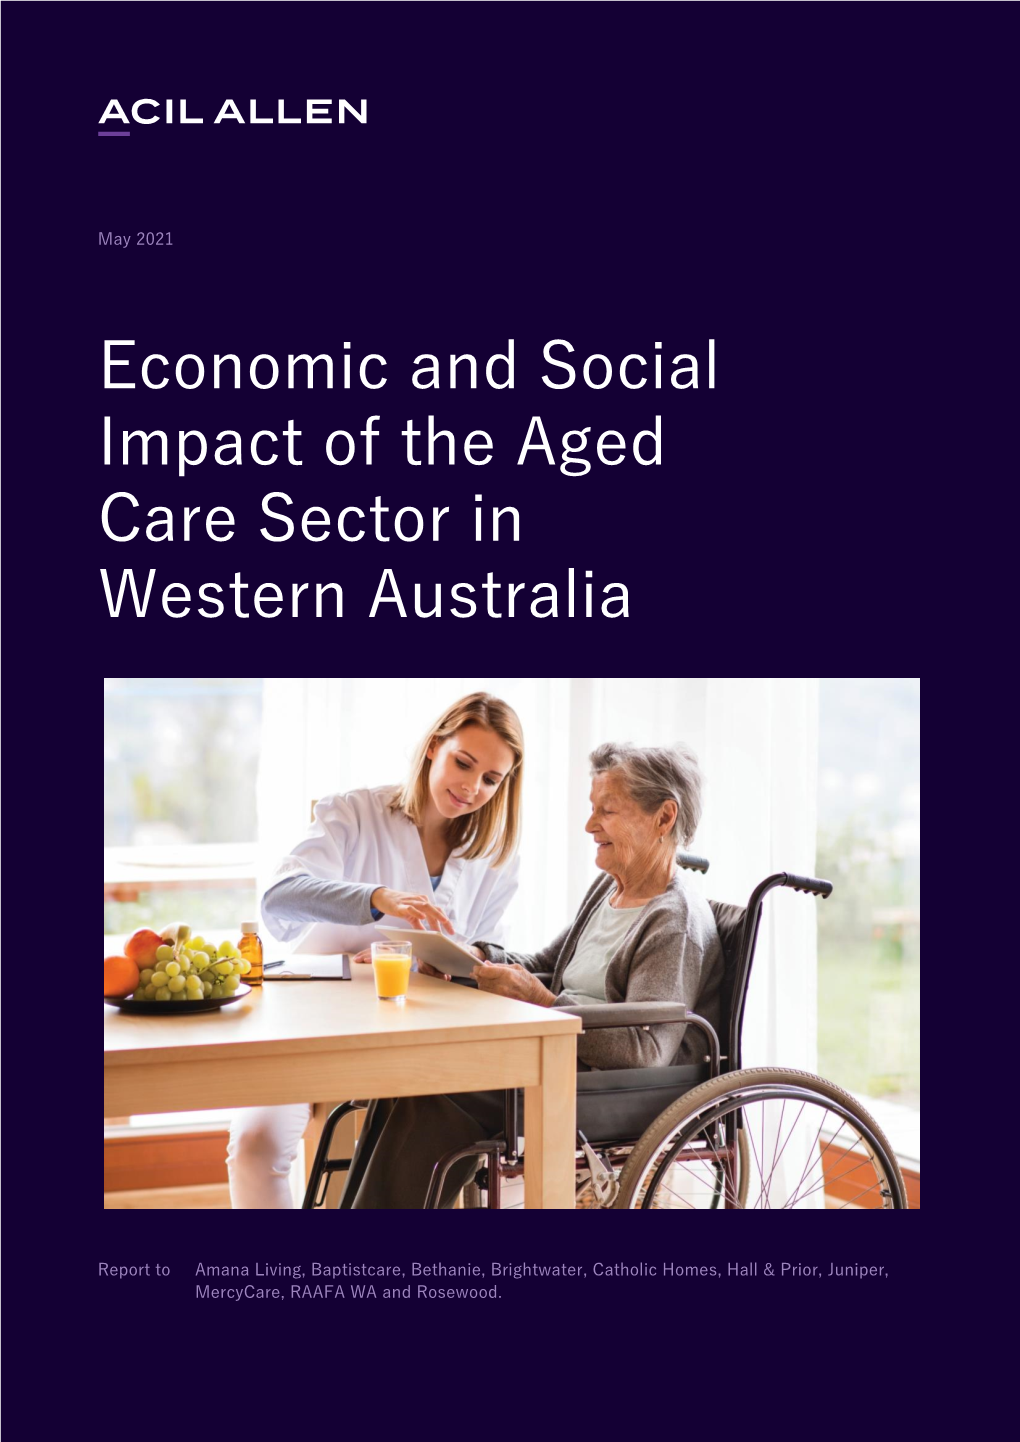 Economic and Social Impact of the Aged Care Sector in WA